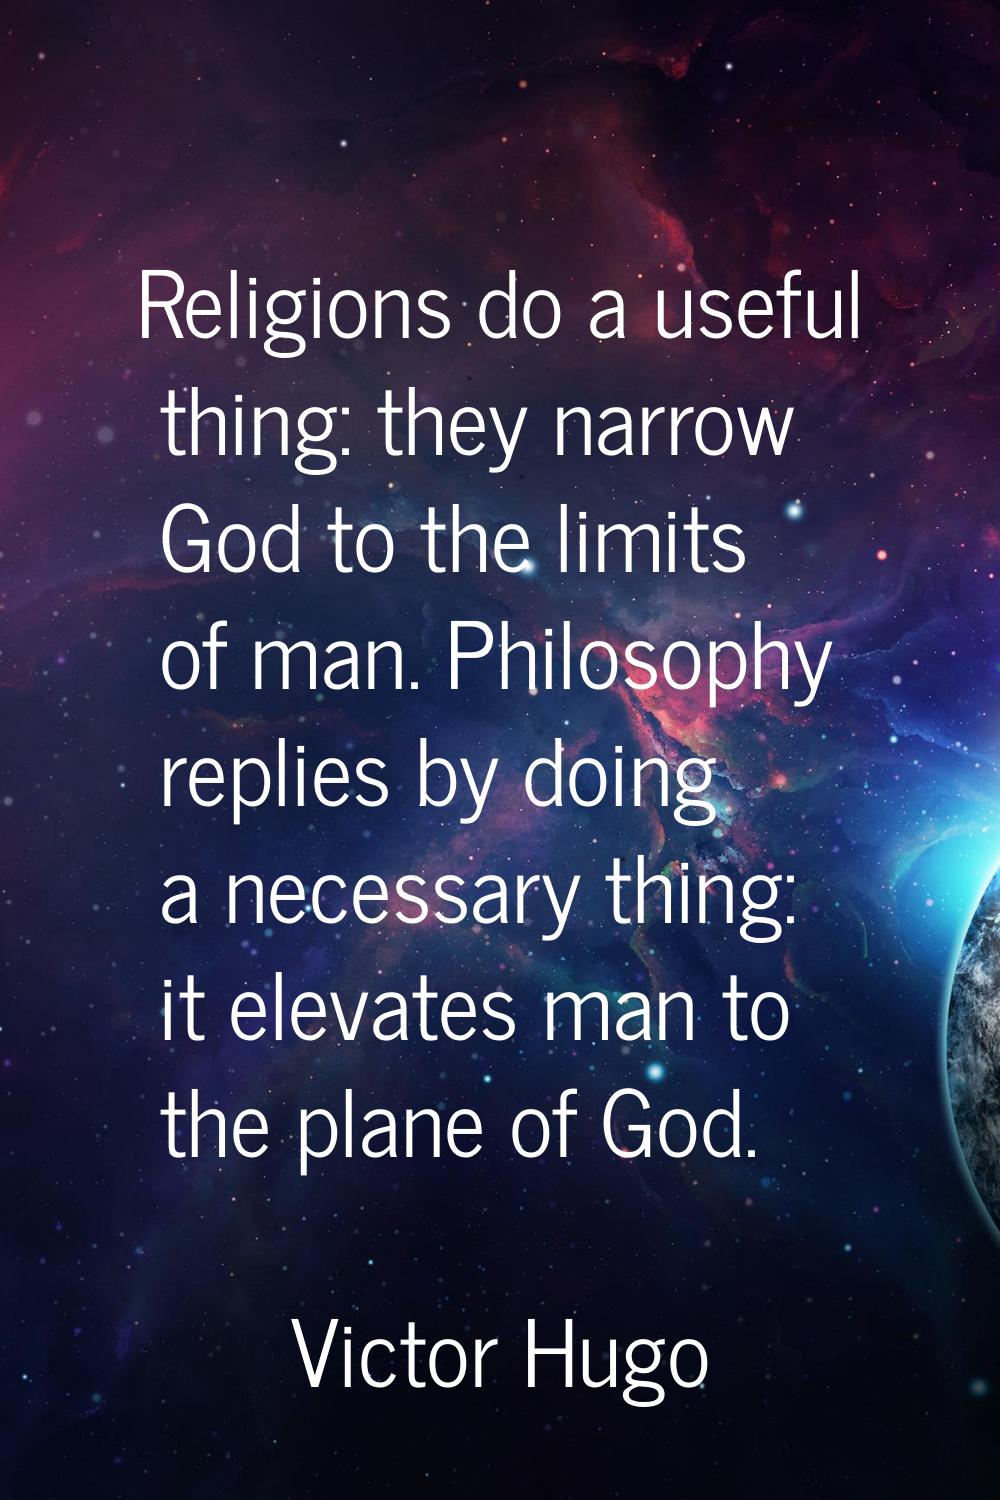 Religions do a useful thing: they narrow God to the limits of man. Philosophy replies by doing a ne